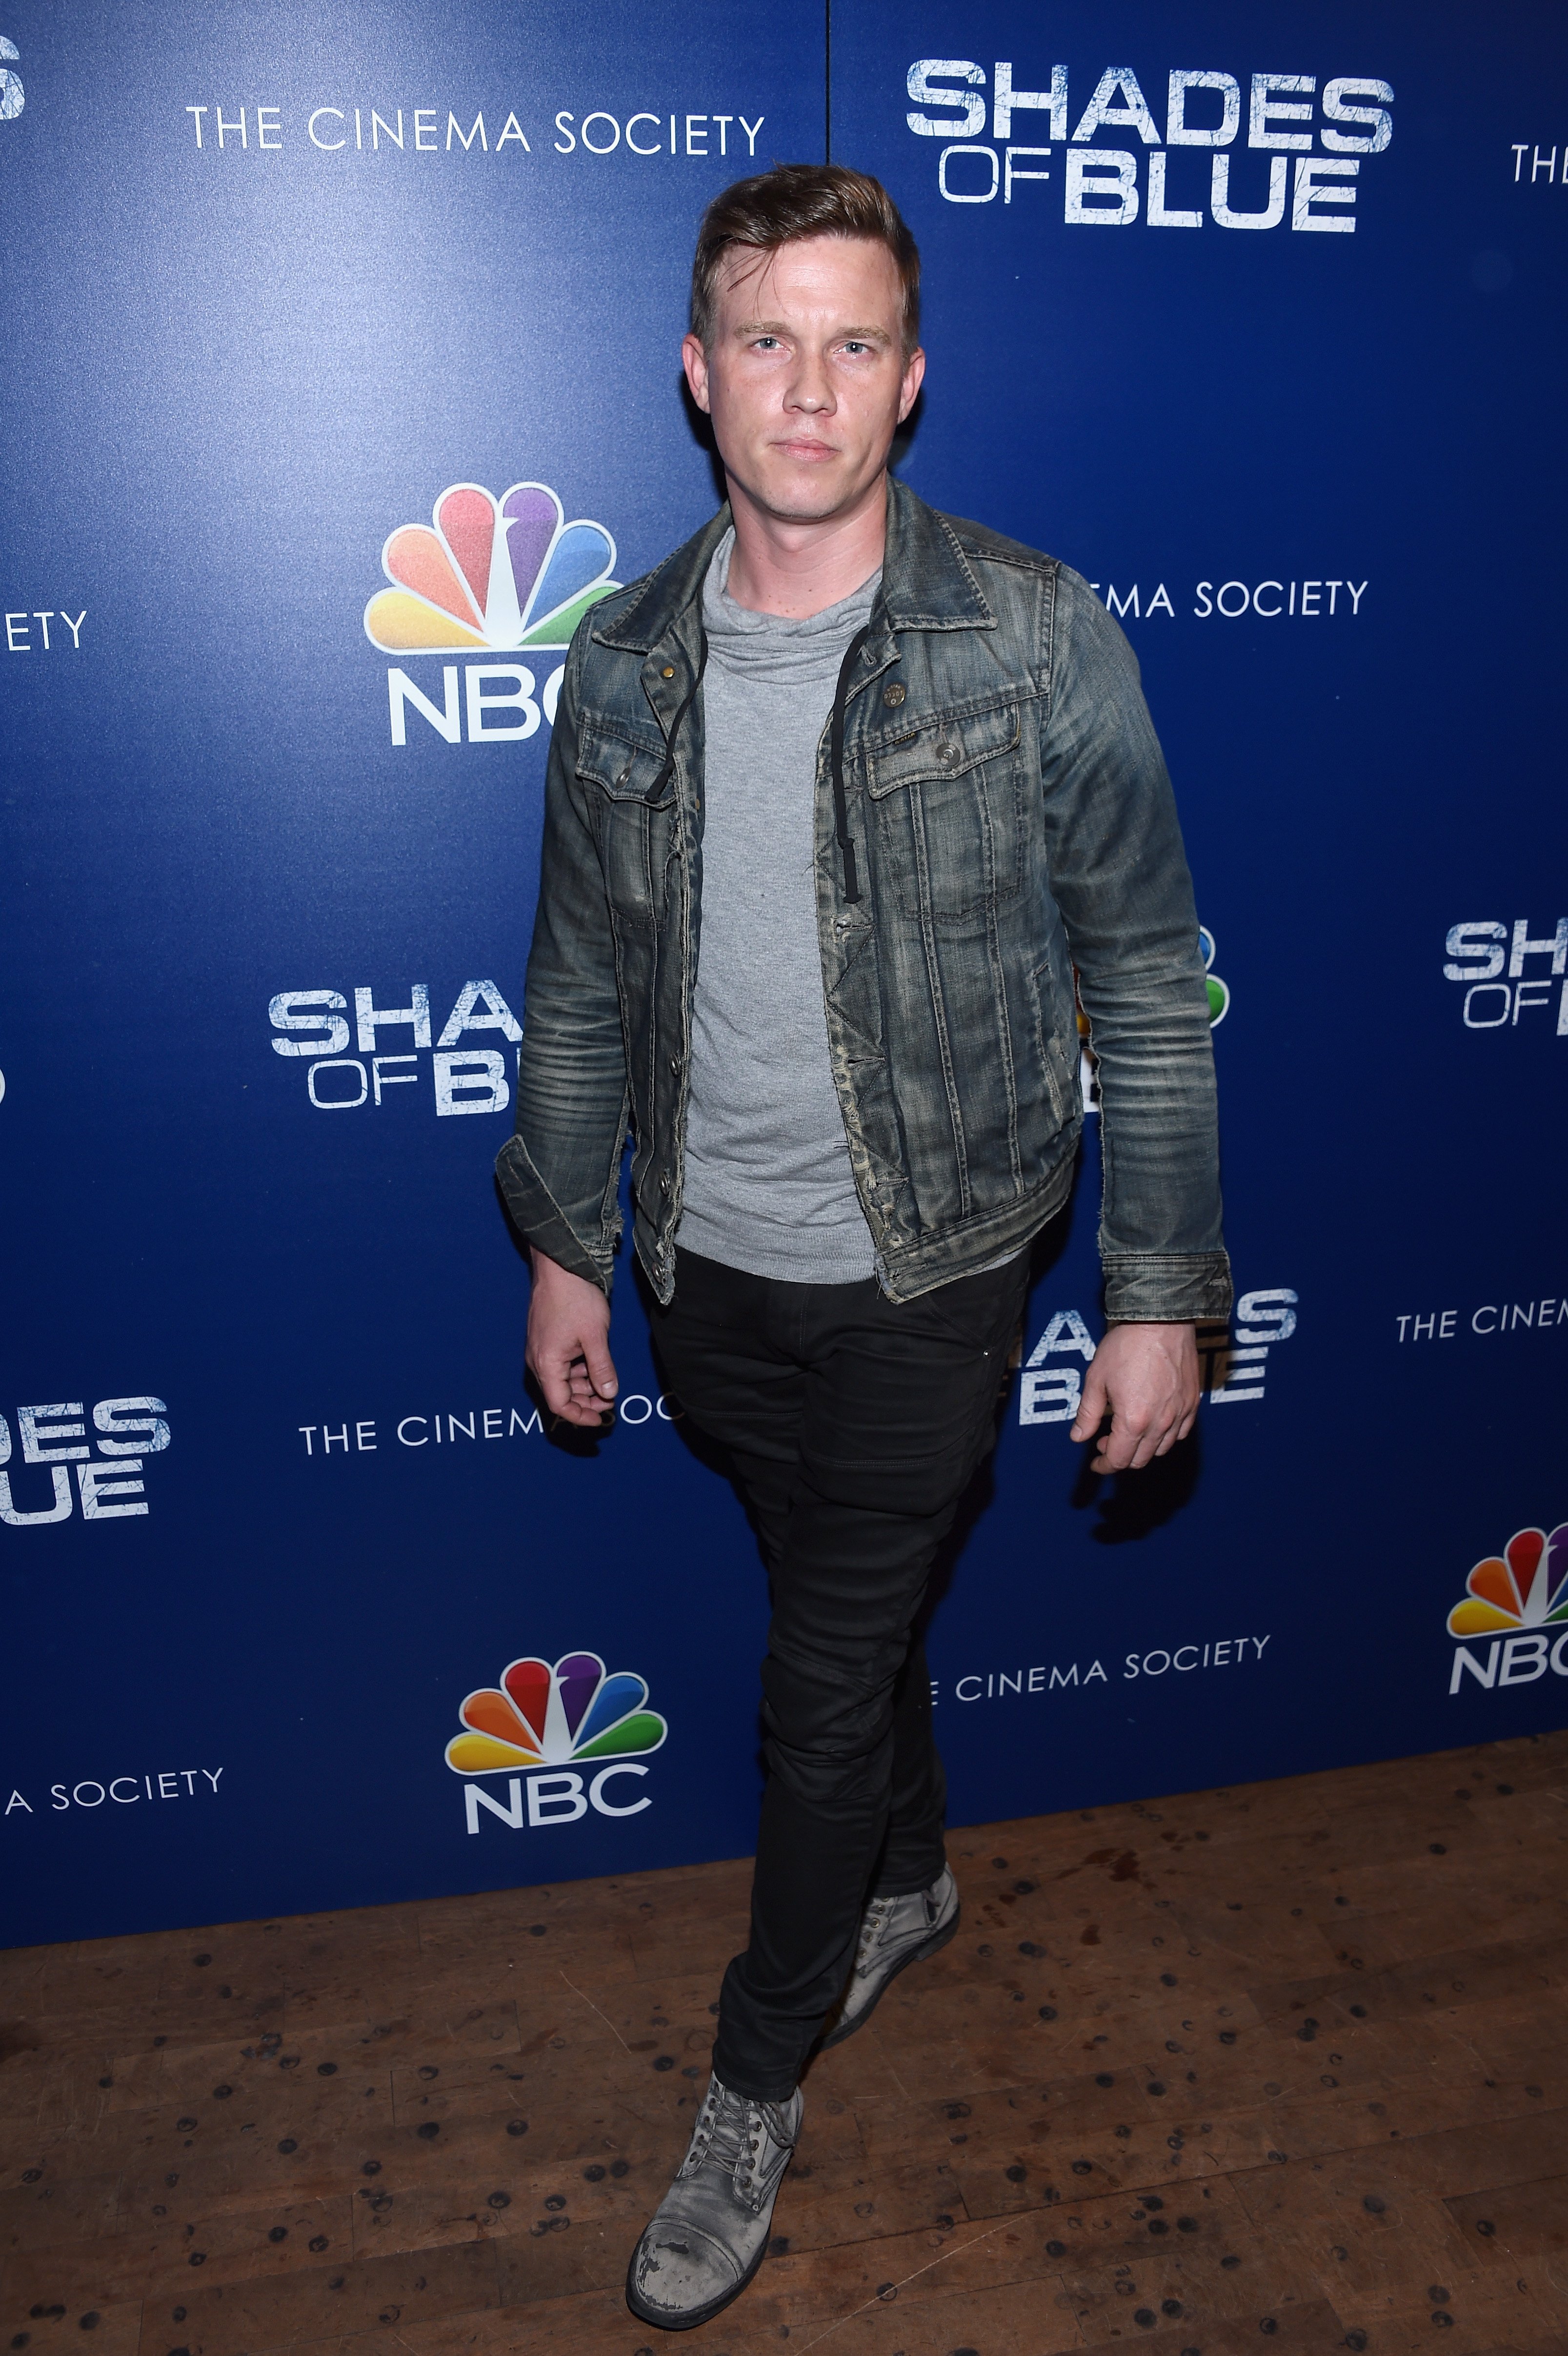 Warren Kole attends The Season 2 Premiere Of "Shades Of Blue" hosted by NBC And The Cinema Society at The Roxy Hotel Cinema on March 1, 2017, in New York City. | Source: Getty Images.